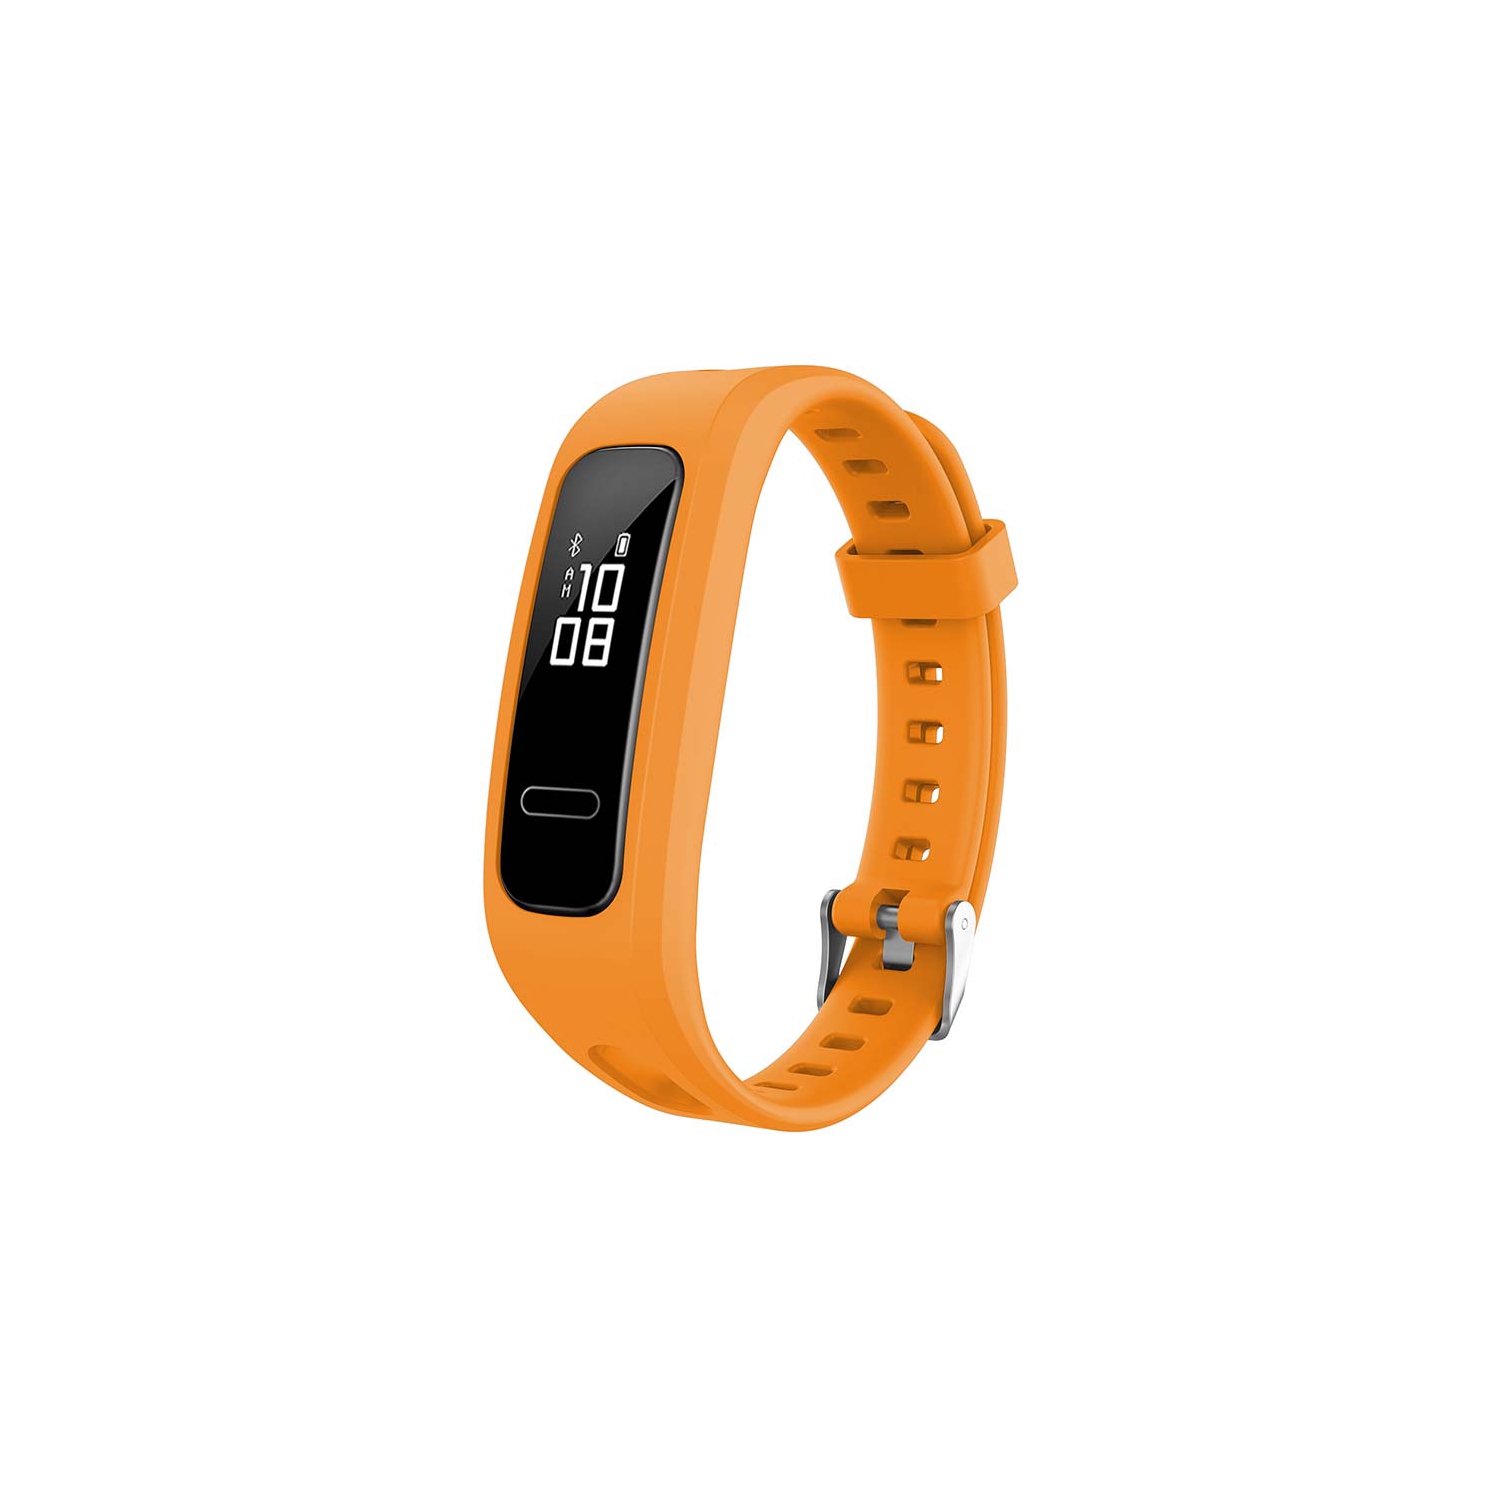 StrapsCo Silicone Rubber Watch Band Strap for Huawei Honor Band 4 Running Edition / 4e / 3e - Orange